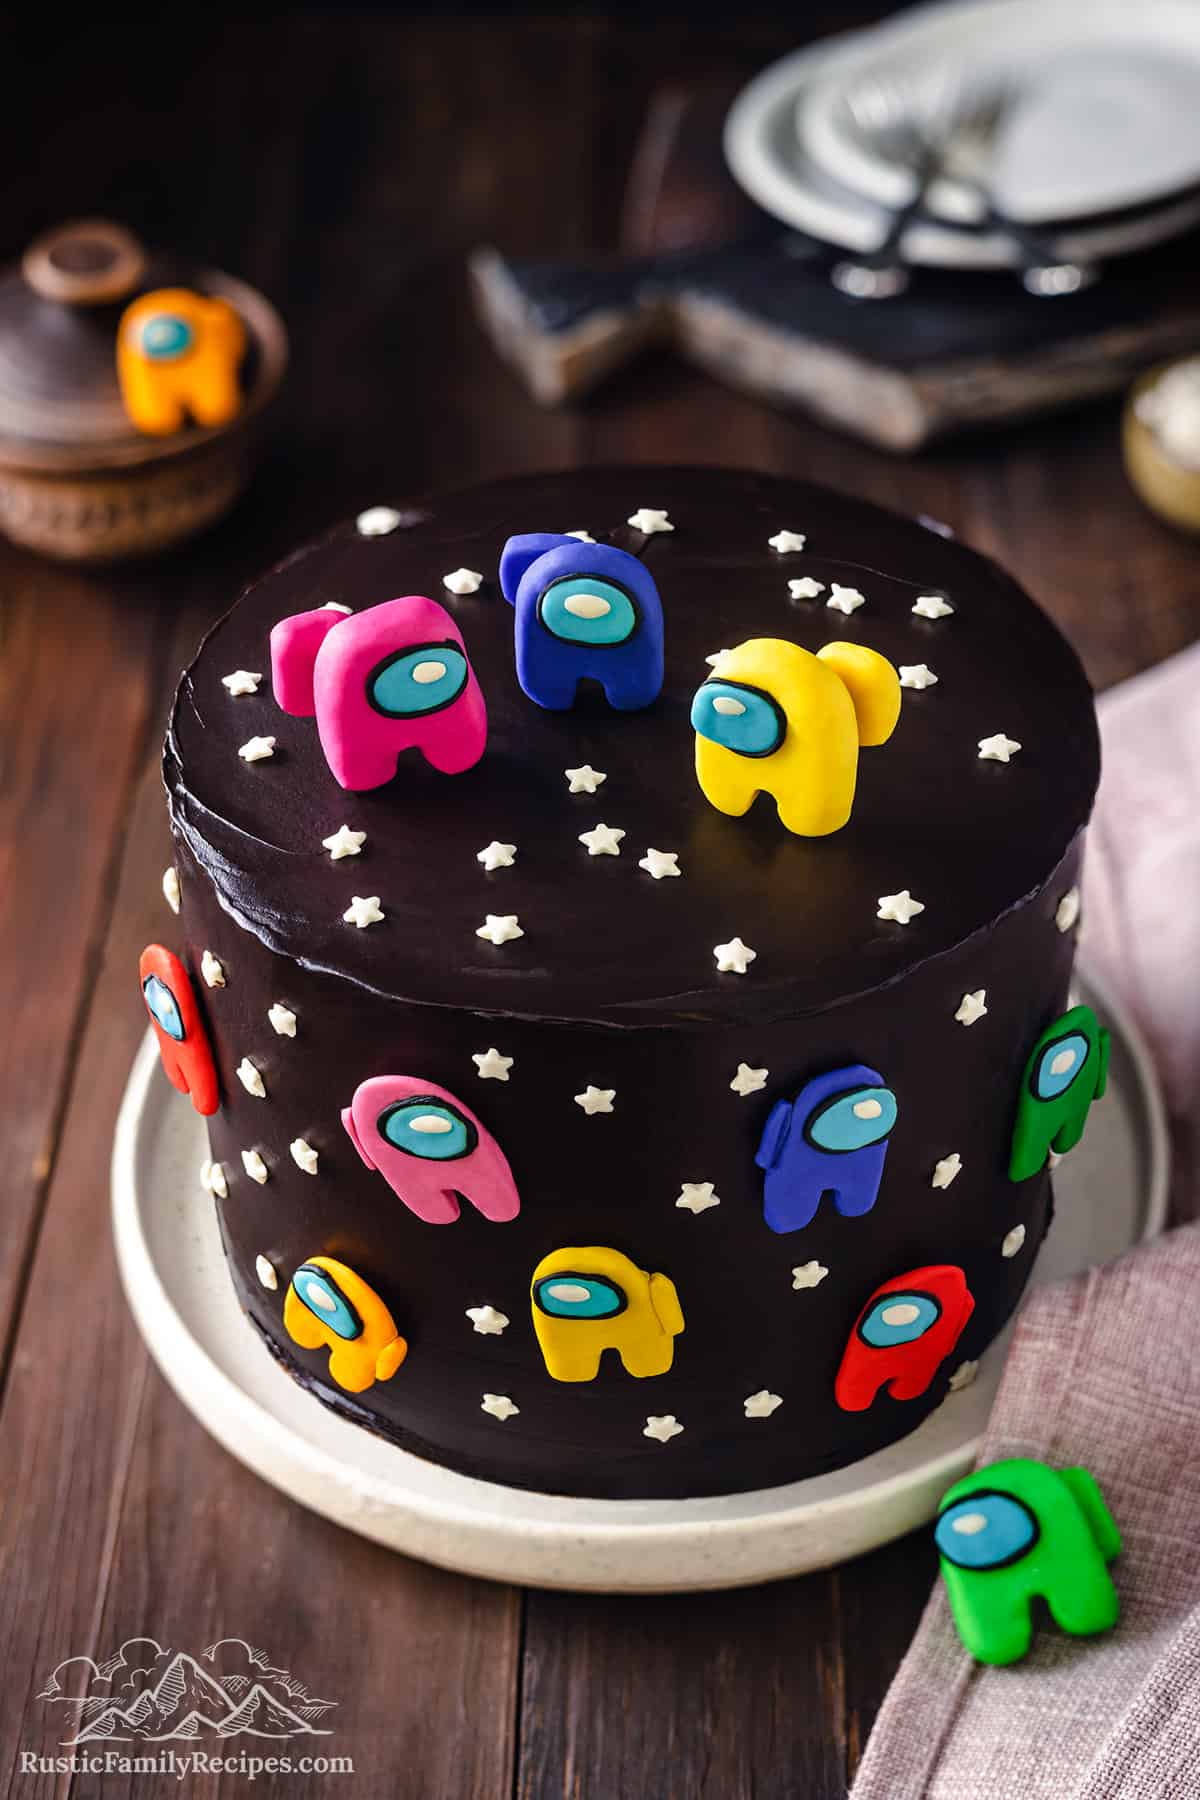 Decorated Among Us cake with black frosting and fondant characters